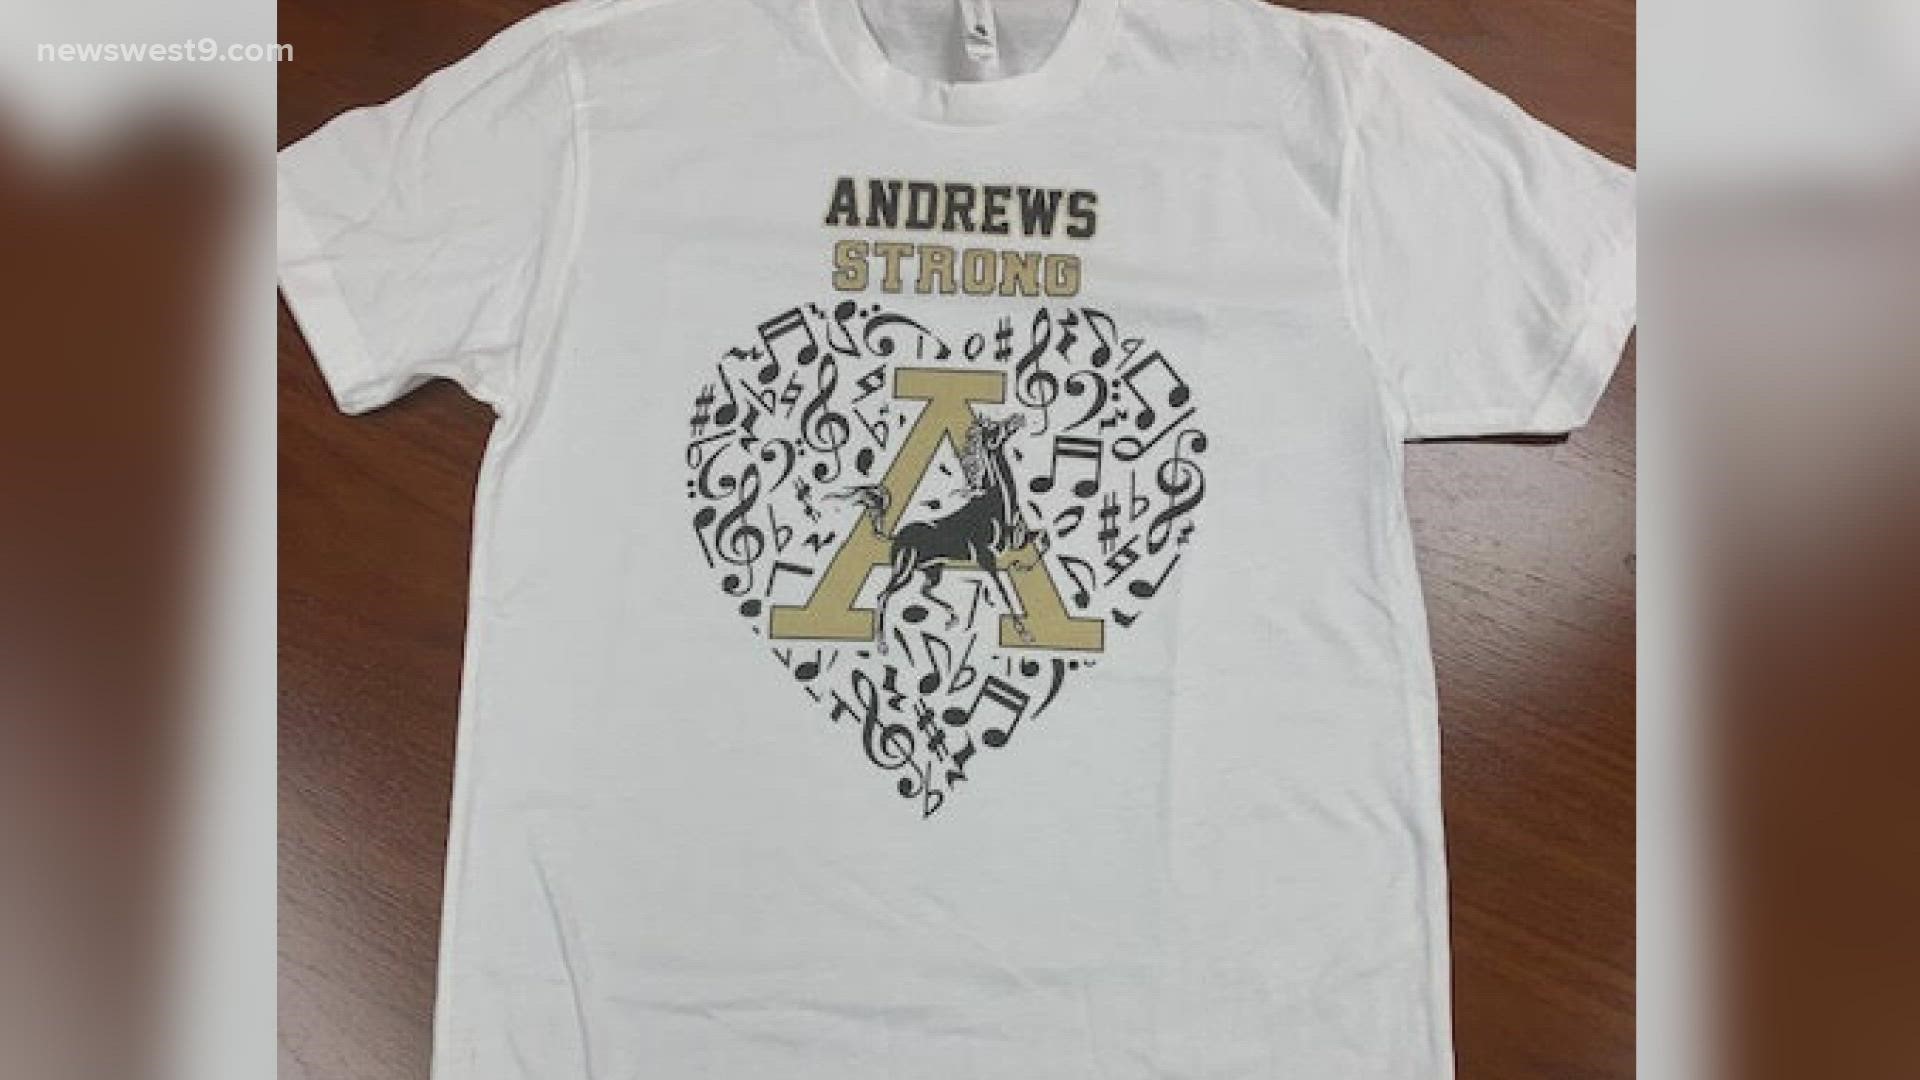 Edgar Armendariz created the shirts to help out those affected by the bus crash